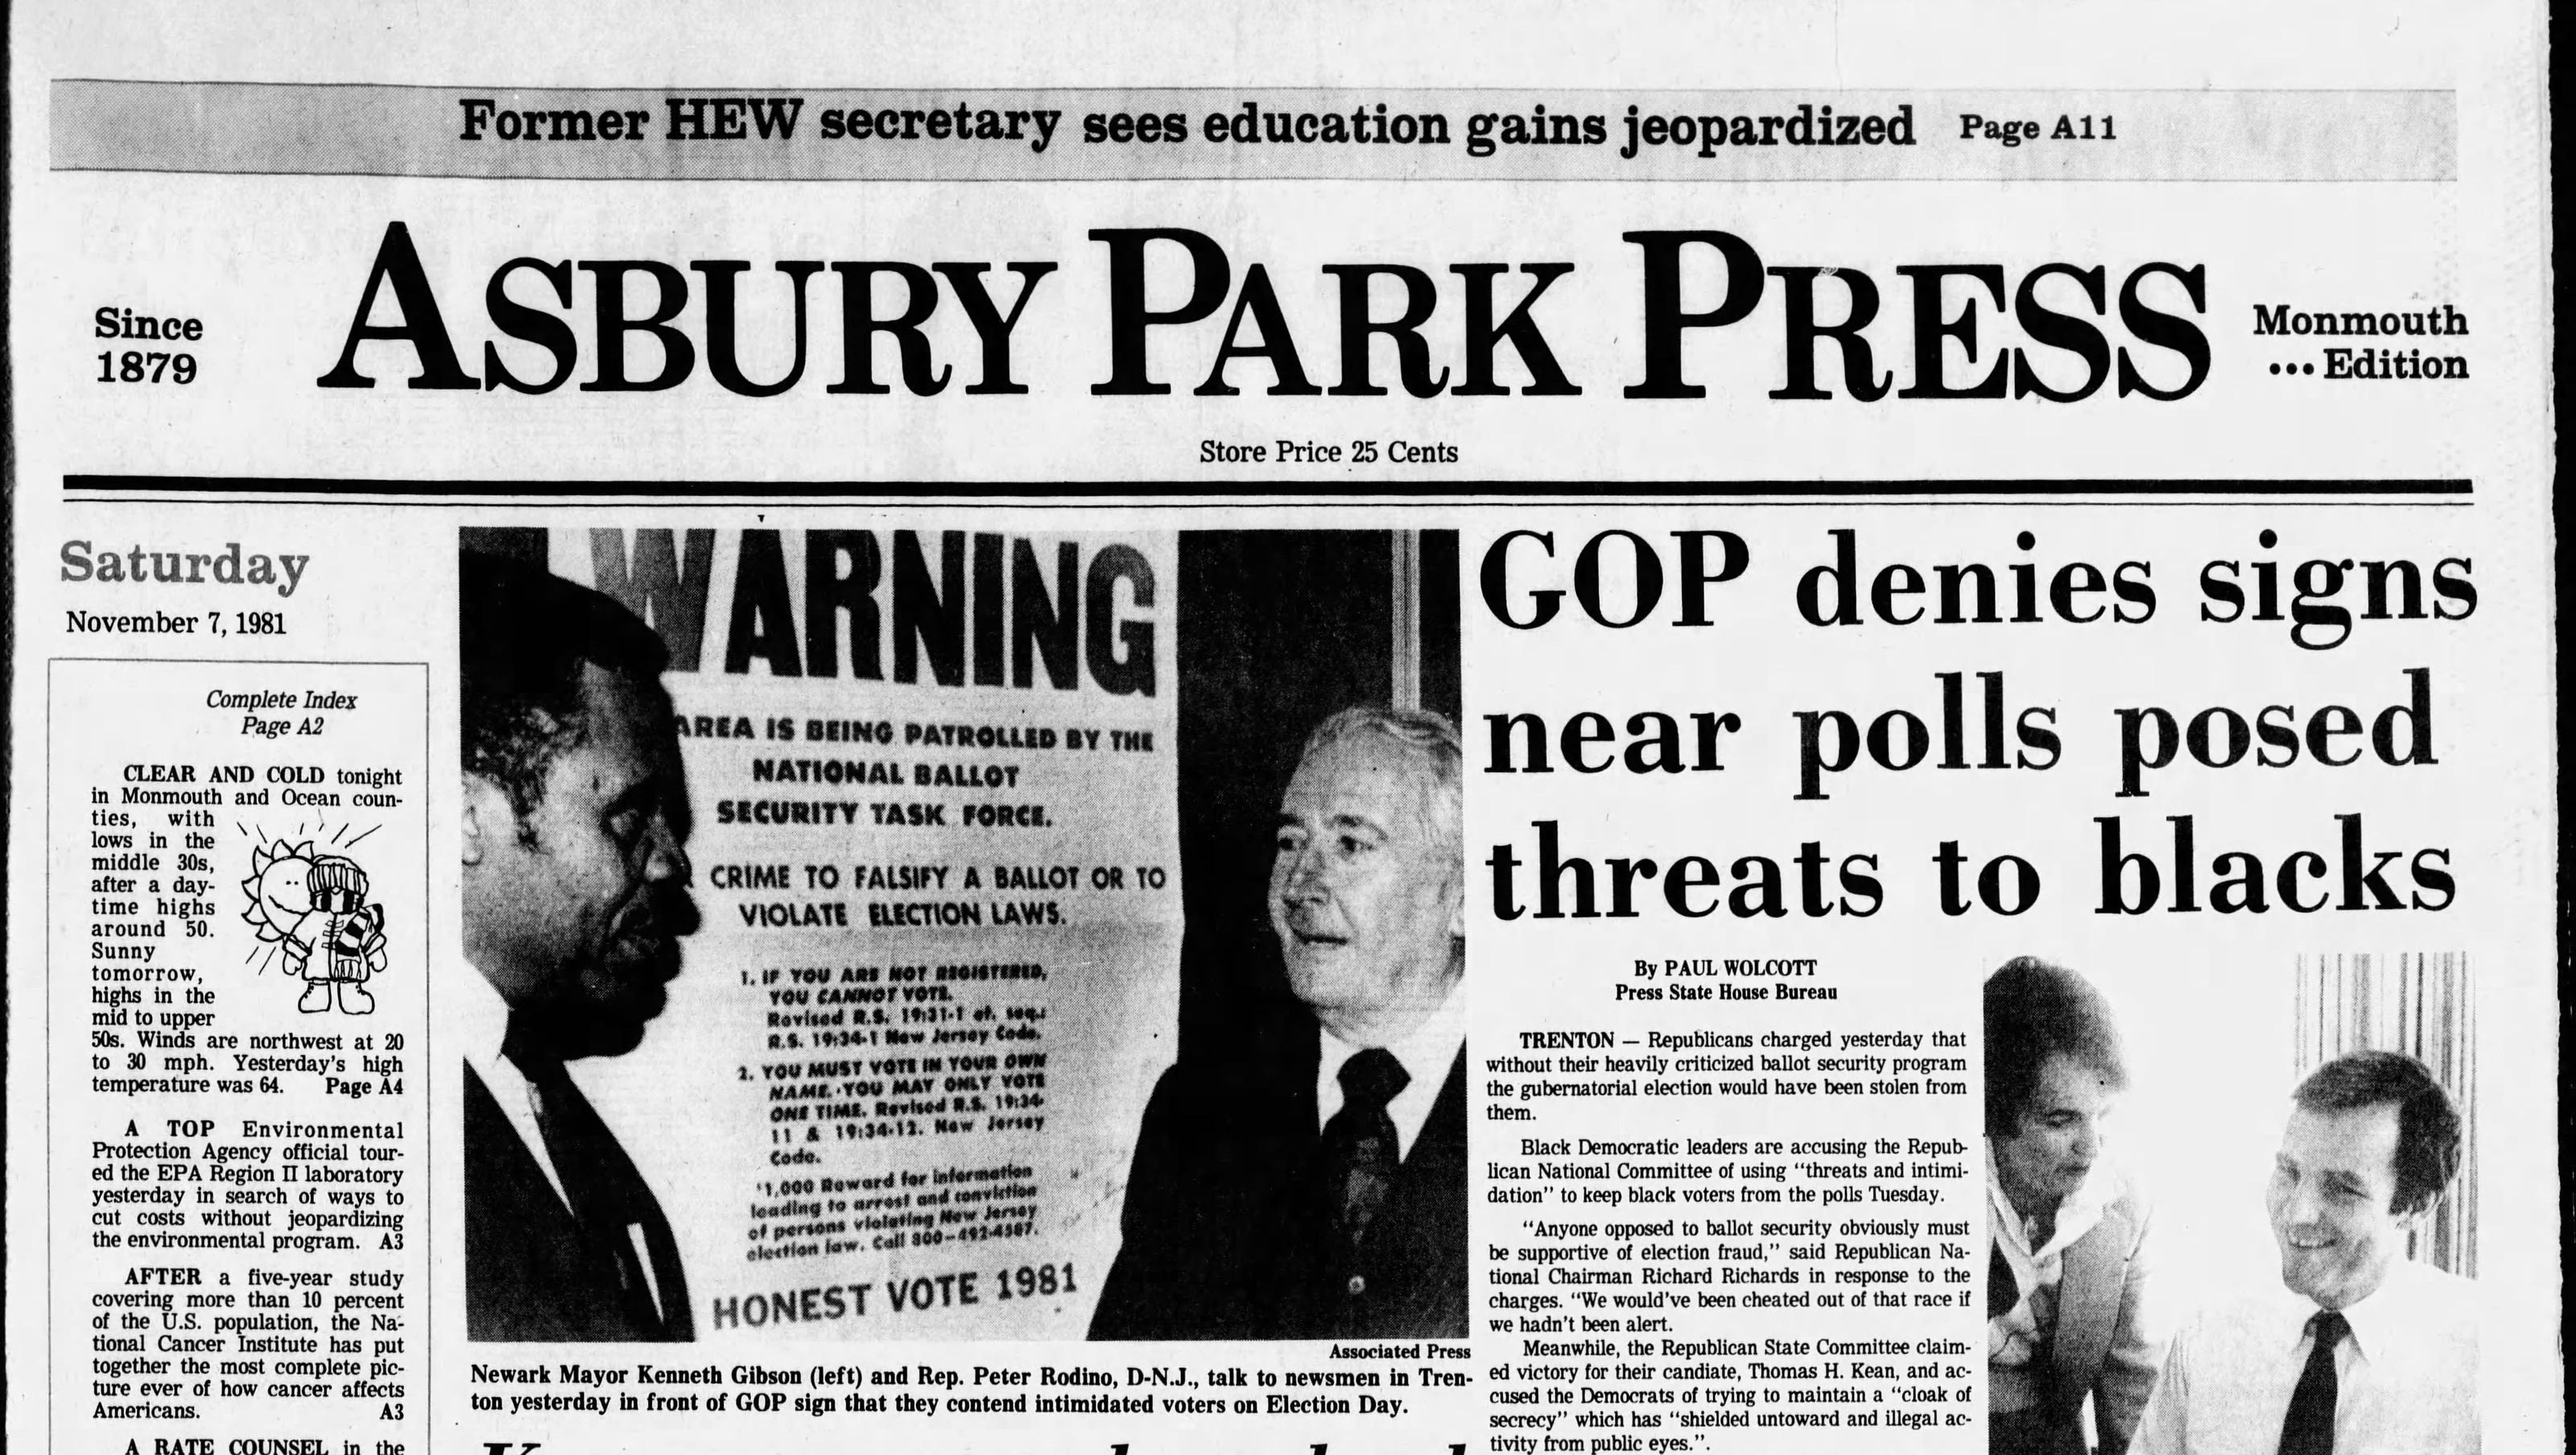 the front page of the Asbury Park Press on Nov. 7, 1981 for5e days after New Jersey's gubernatorial election, reporting on the controversy over the 